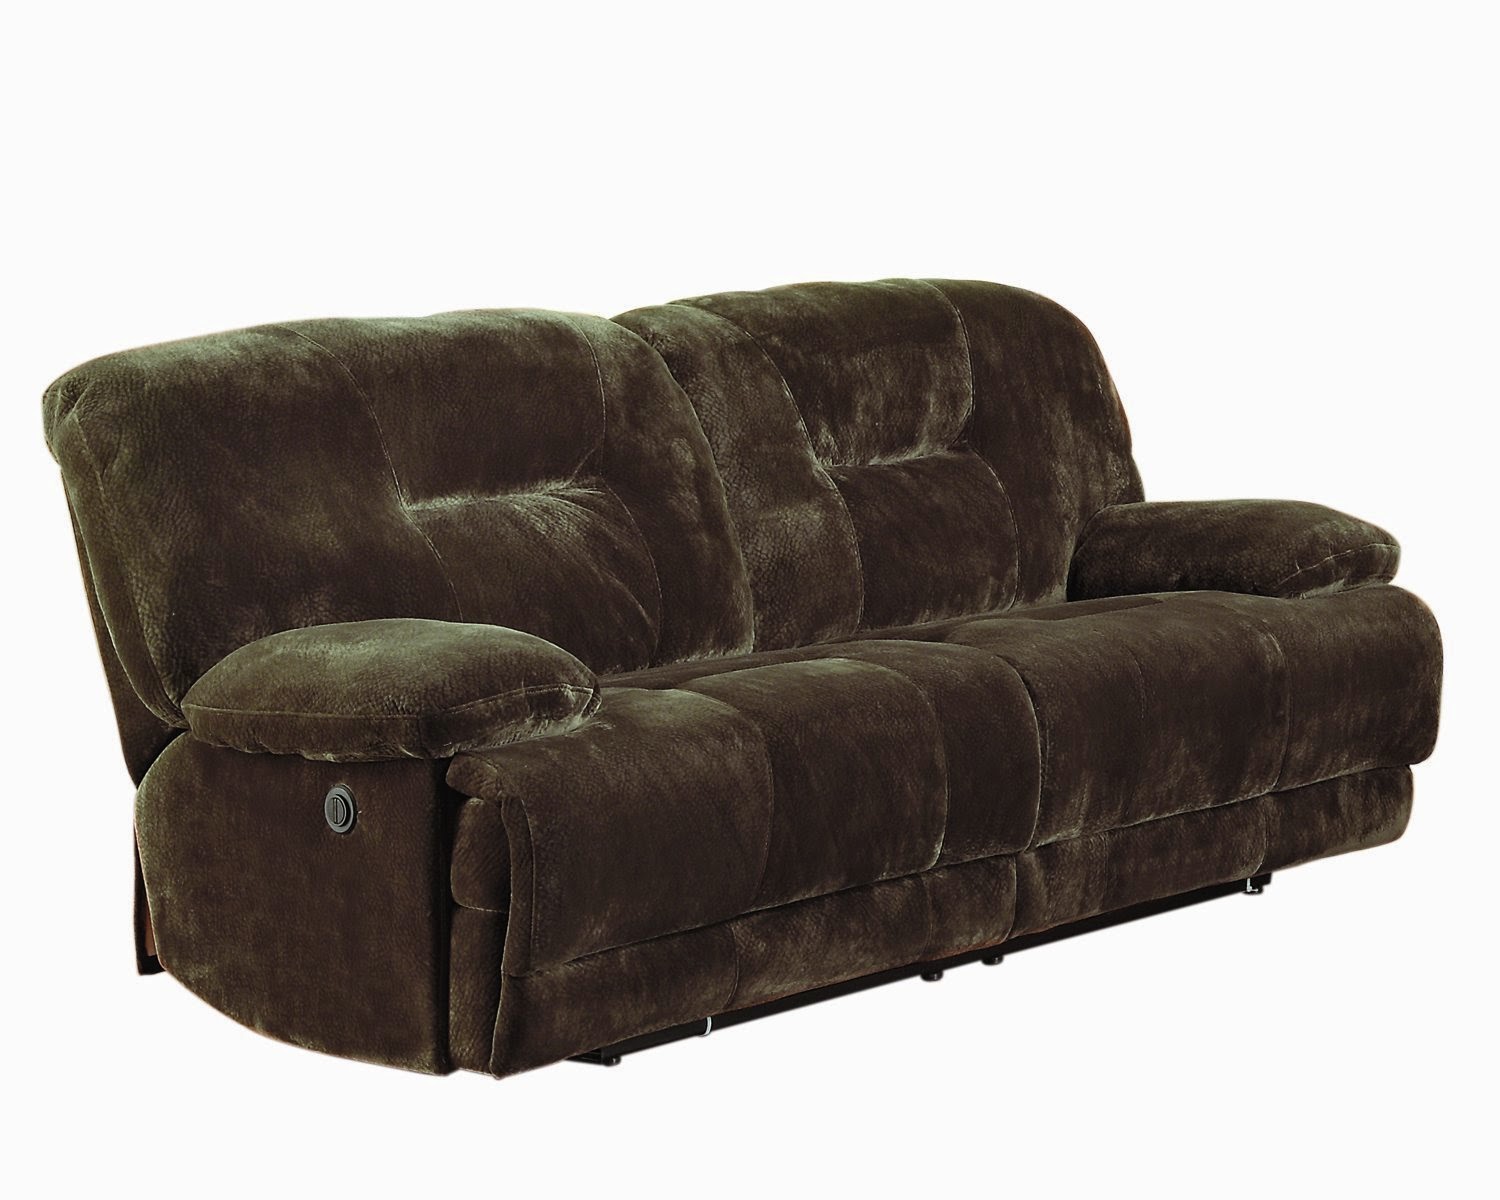 Leather Recliner Furniture 45